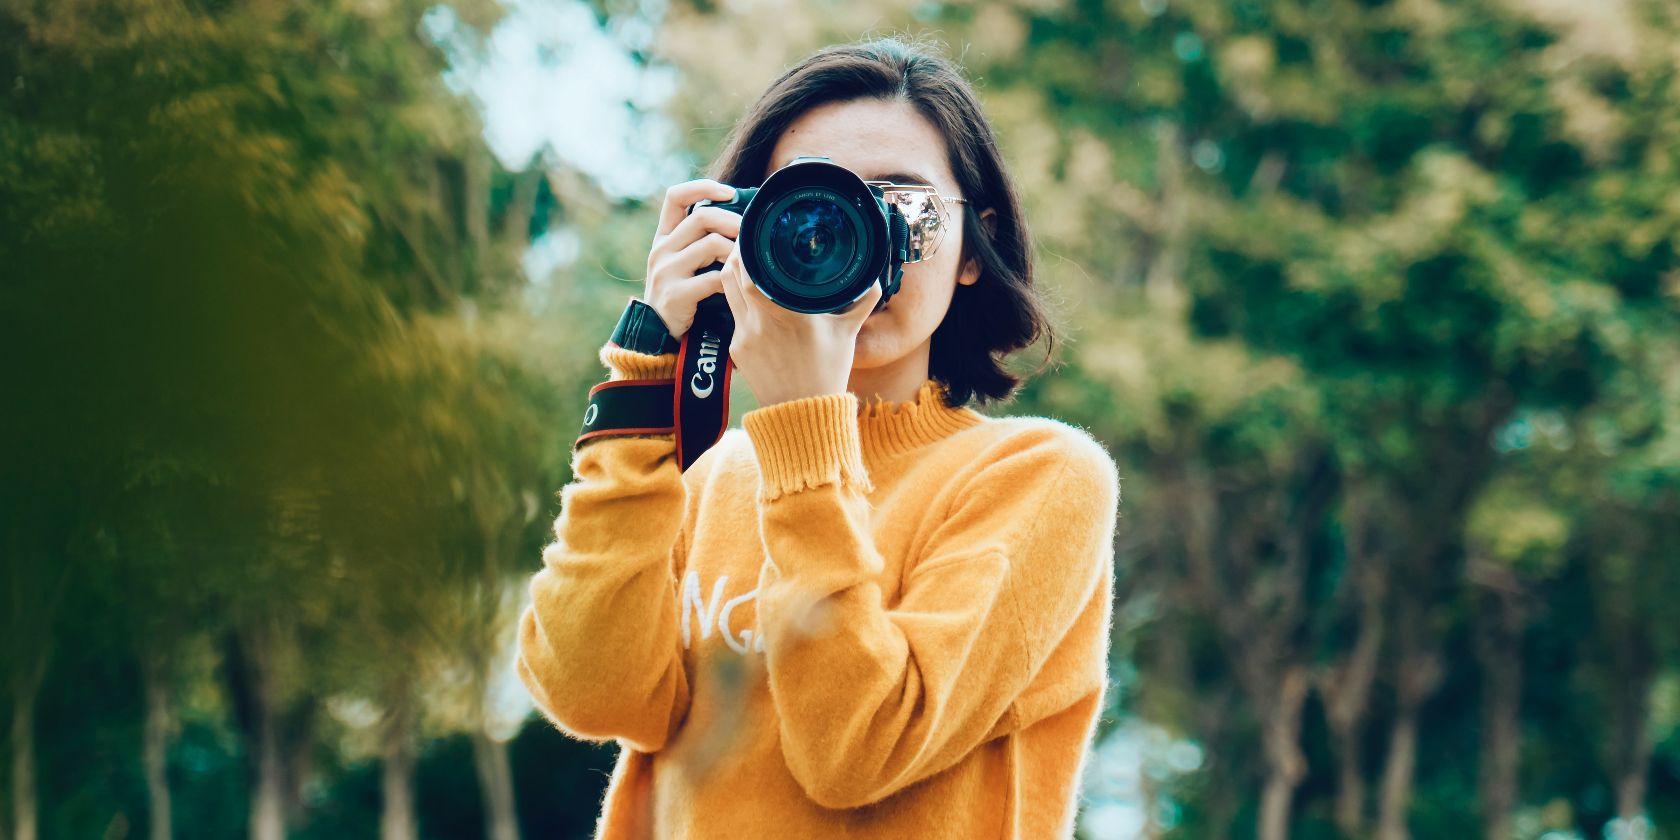 photo of a person with their camera